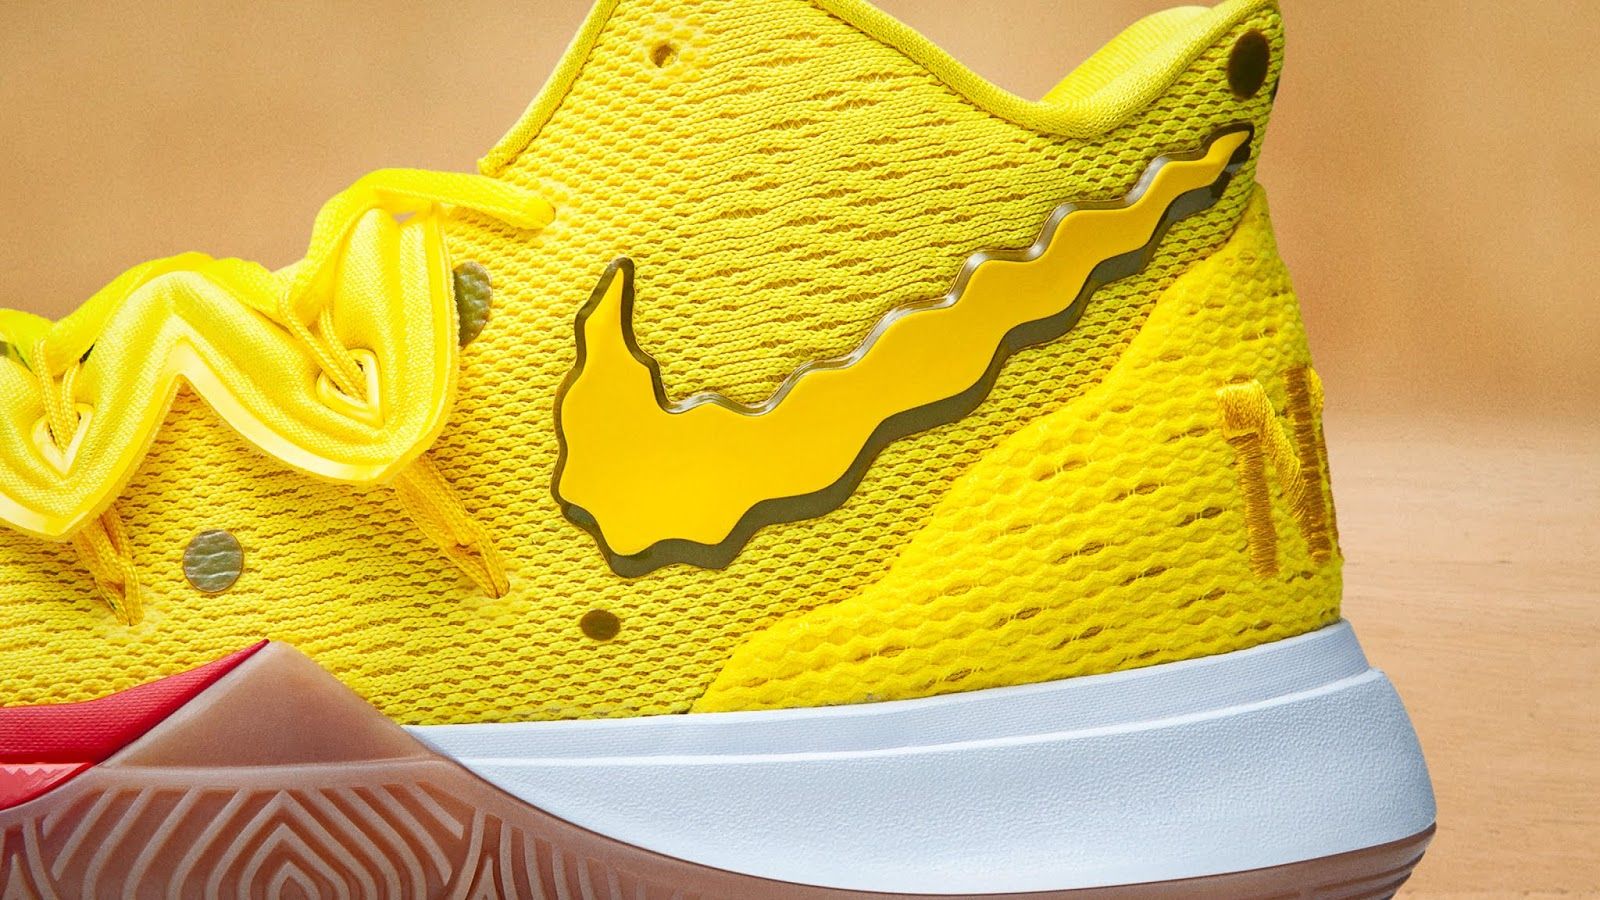 NickALive!: Nike and Nickelodeon Launch the Kyrie x SpongeBob SquarePants Collection